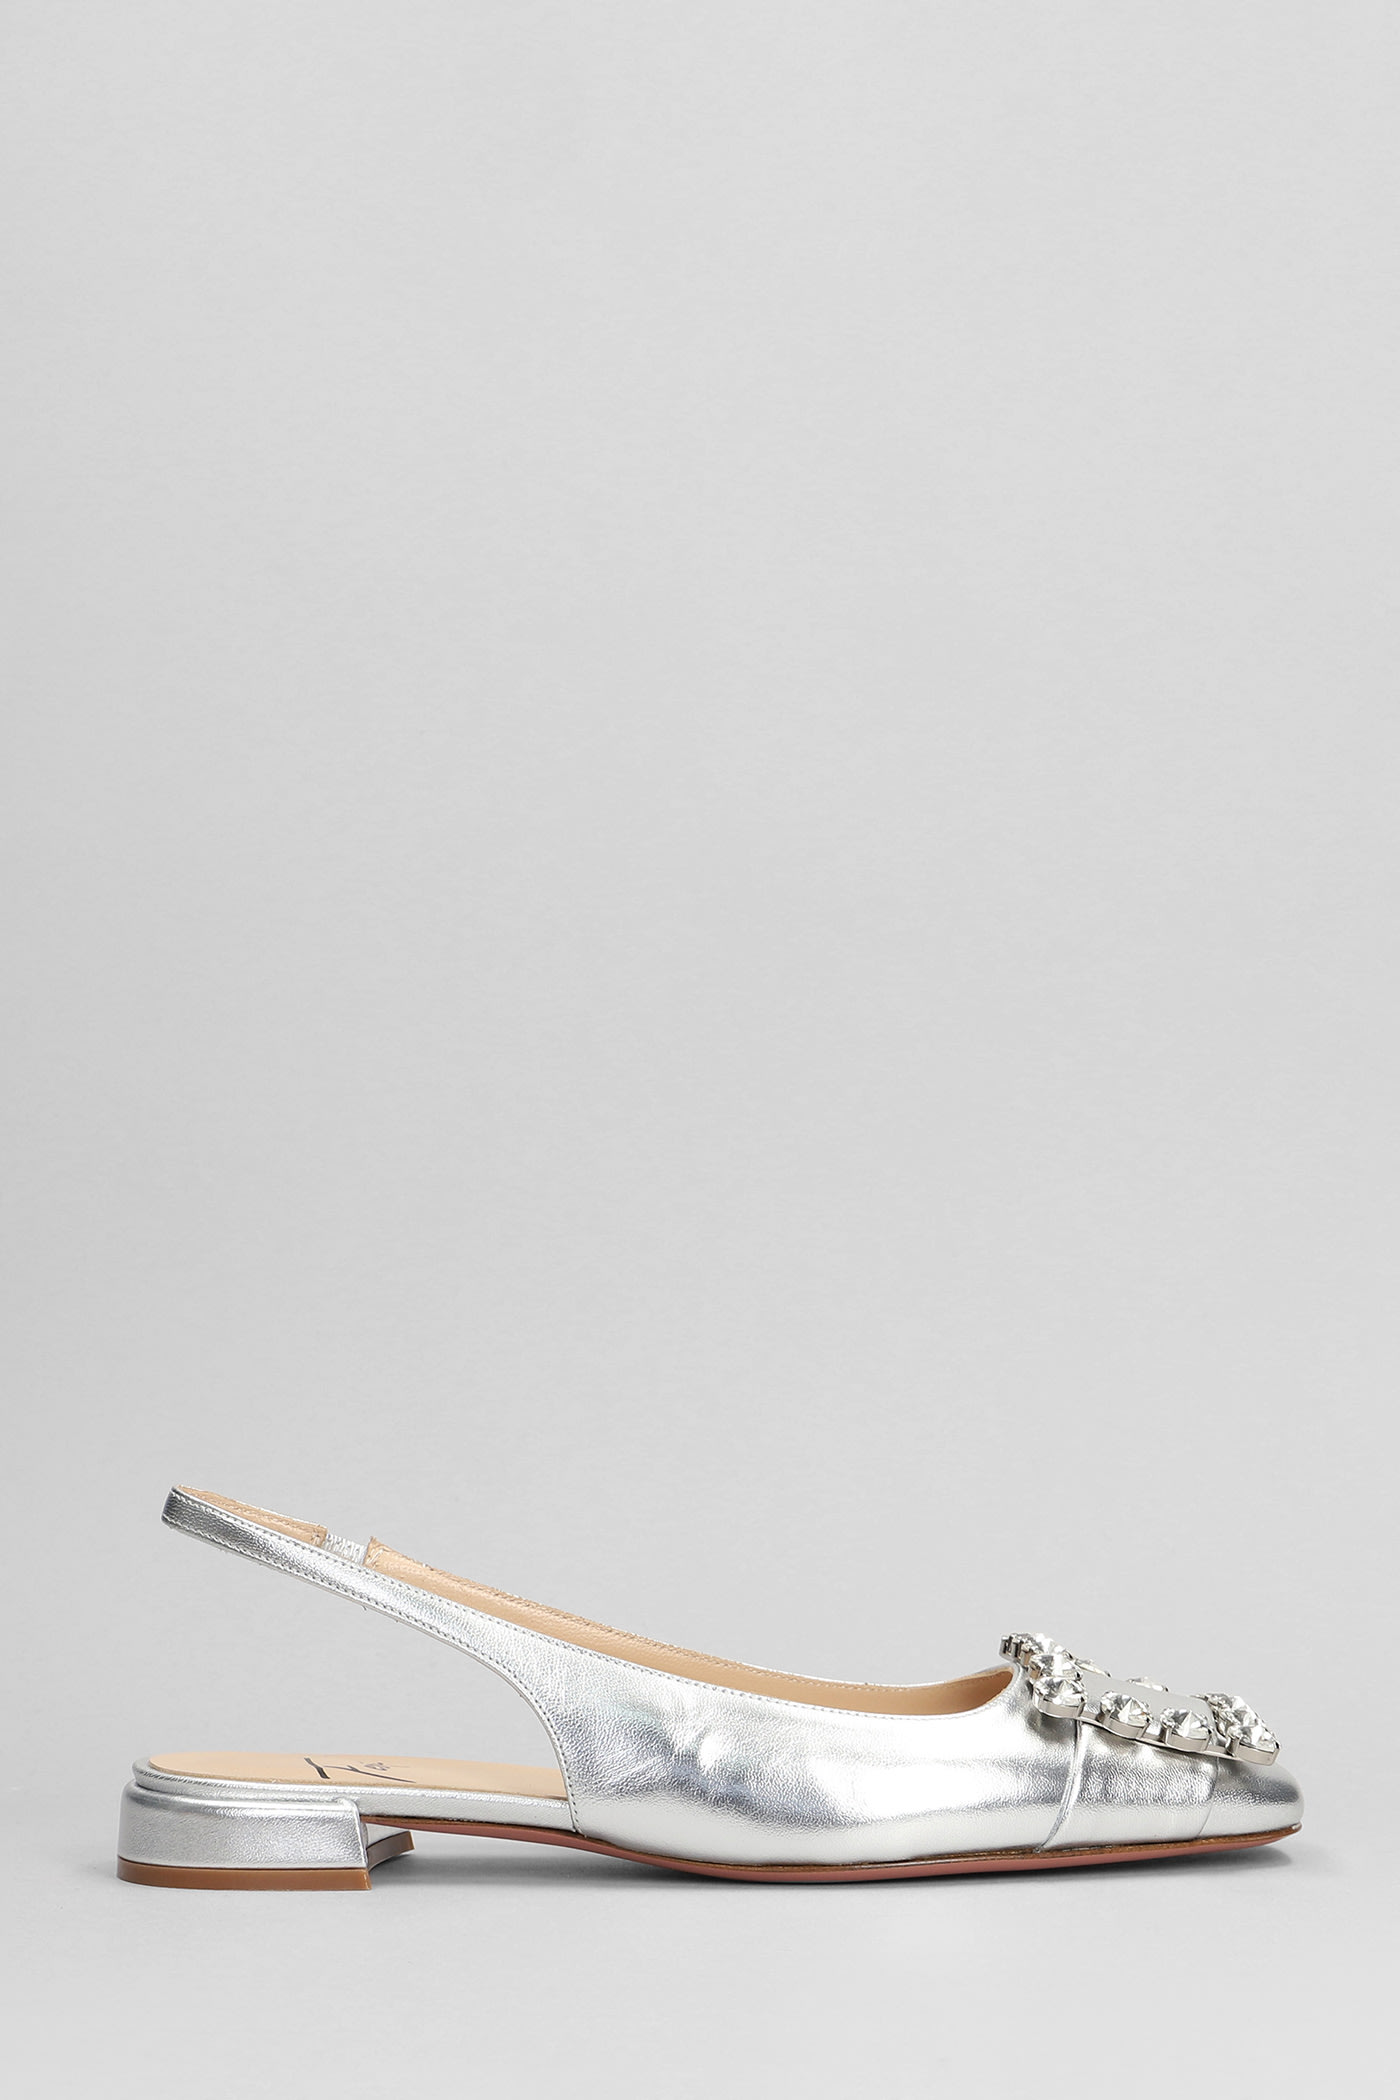 Alaia Ballet Flats In Silver Leather